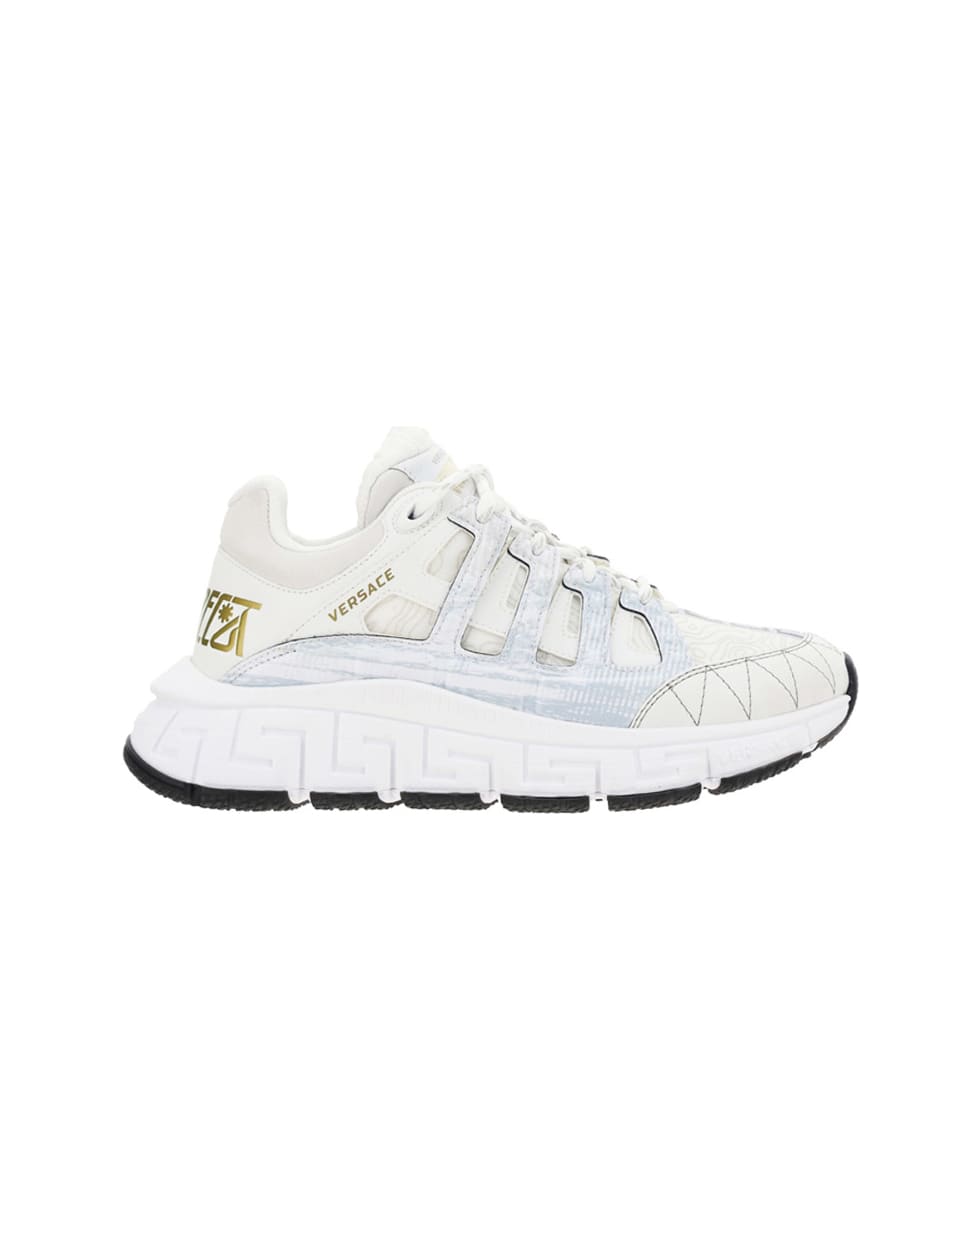 Versace Gianni Versace Sneakers - White+gold